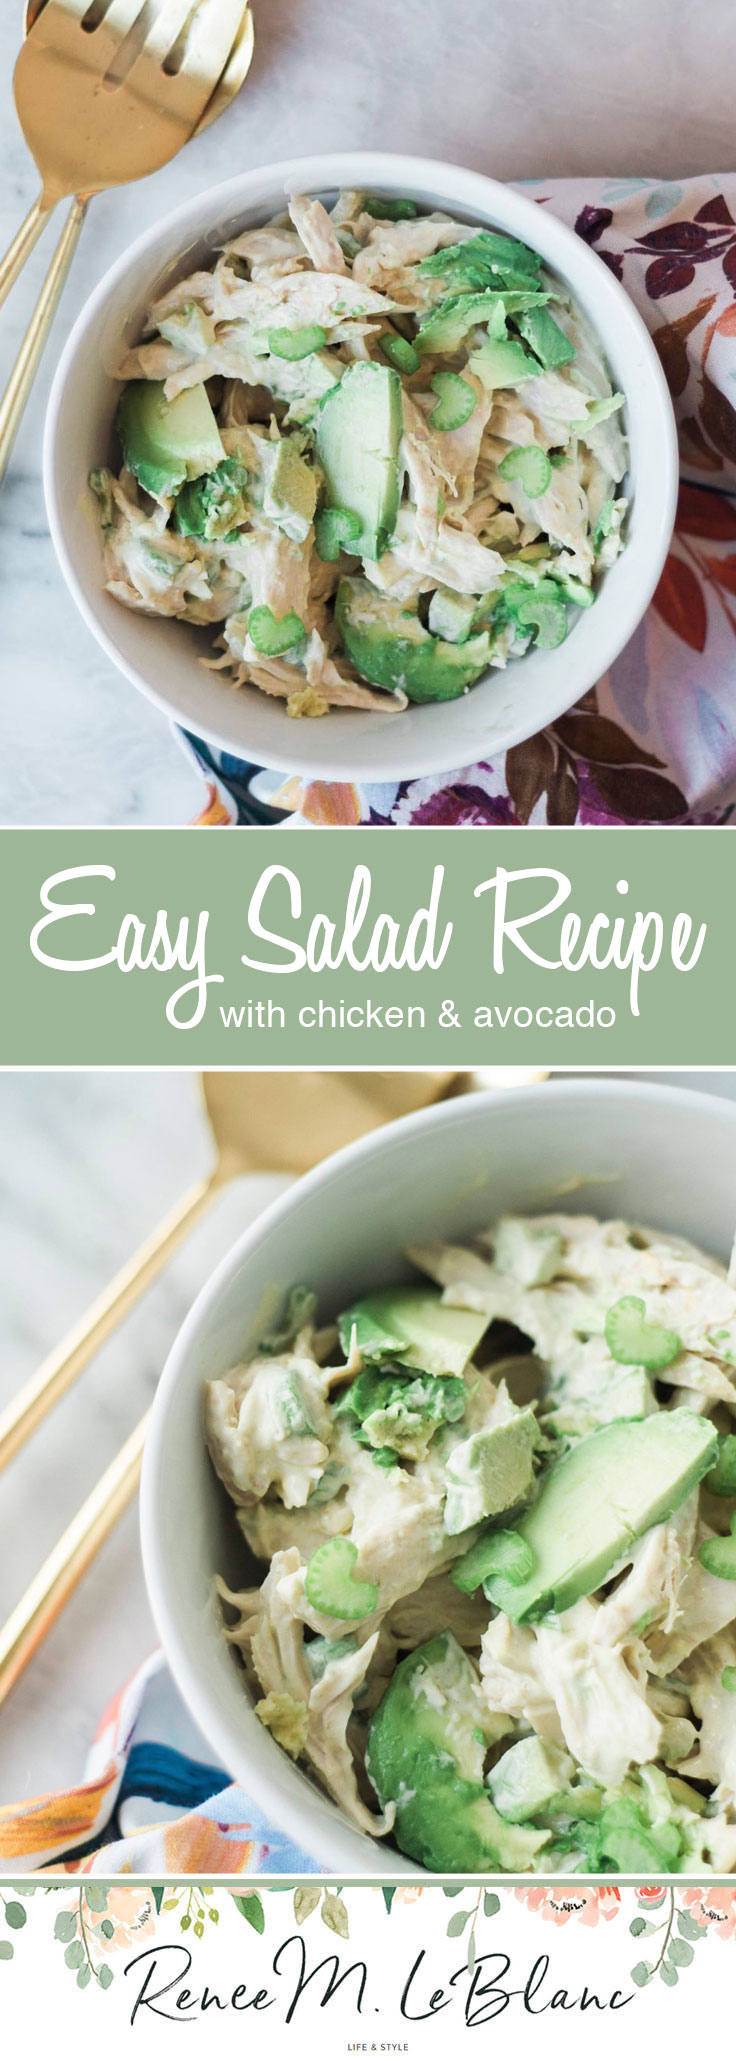 Easy Salad Recipe with Chicken and Avocado